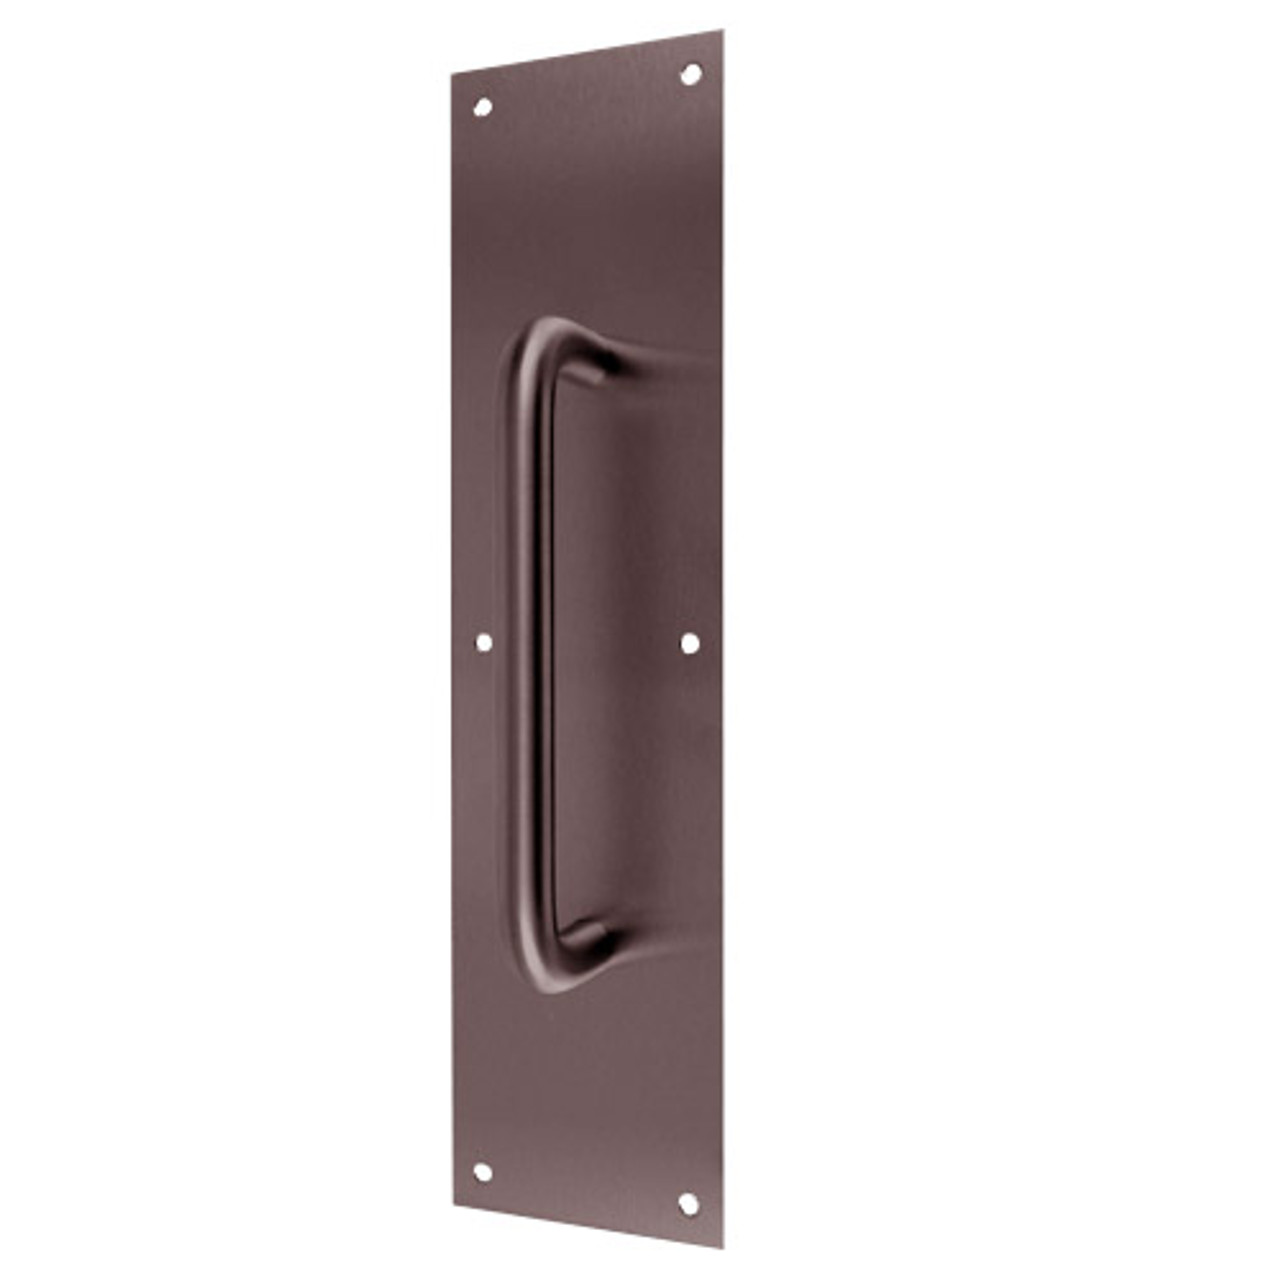 7115-613 Don Jo Pull Plates with 3/4" Round Pulls in Oil Rubbed Bronze Finish